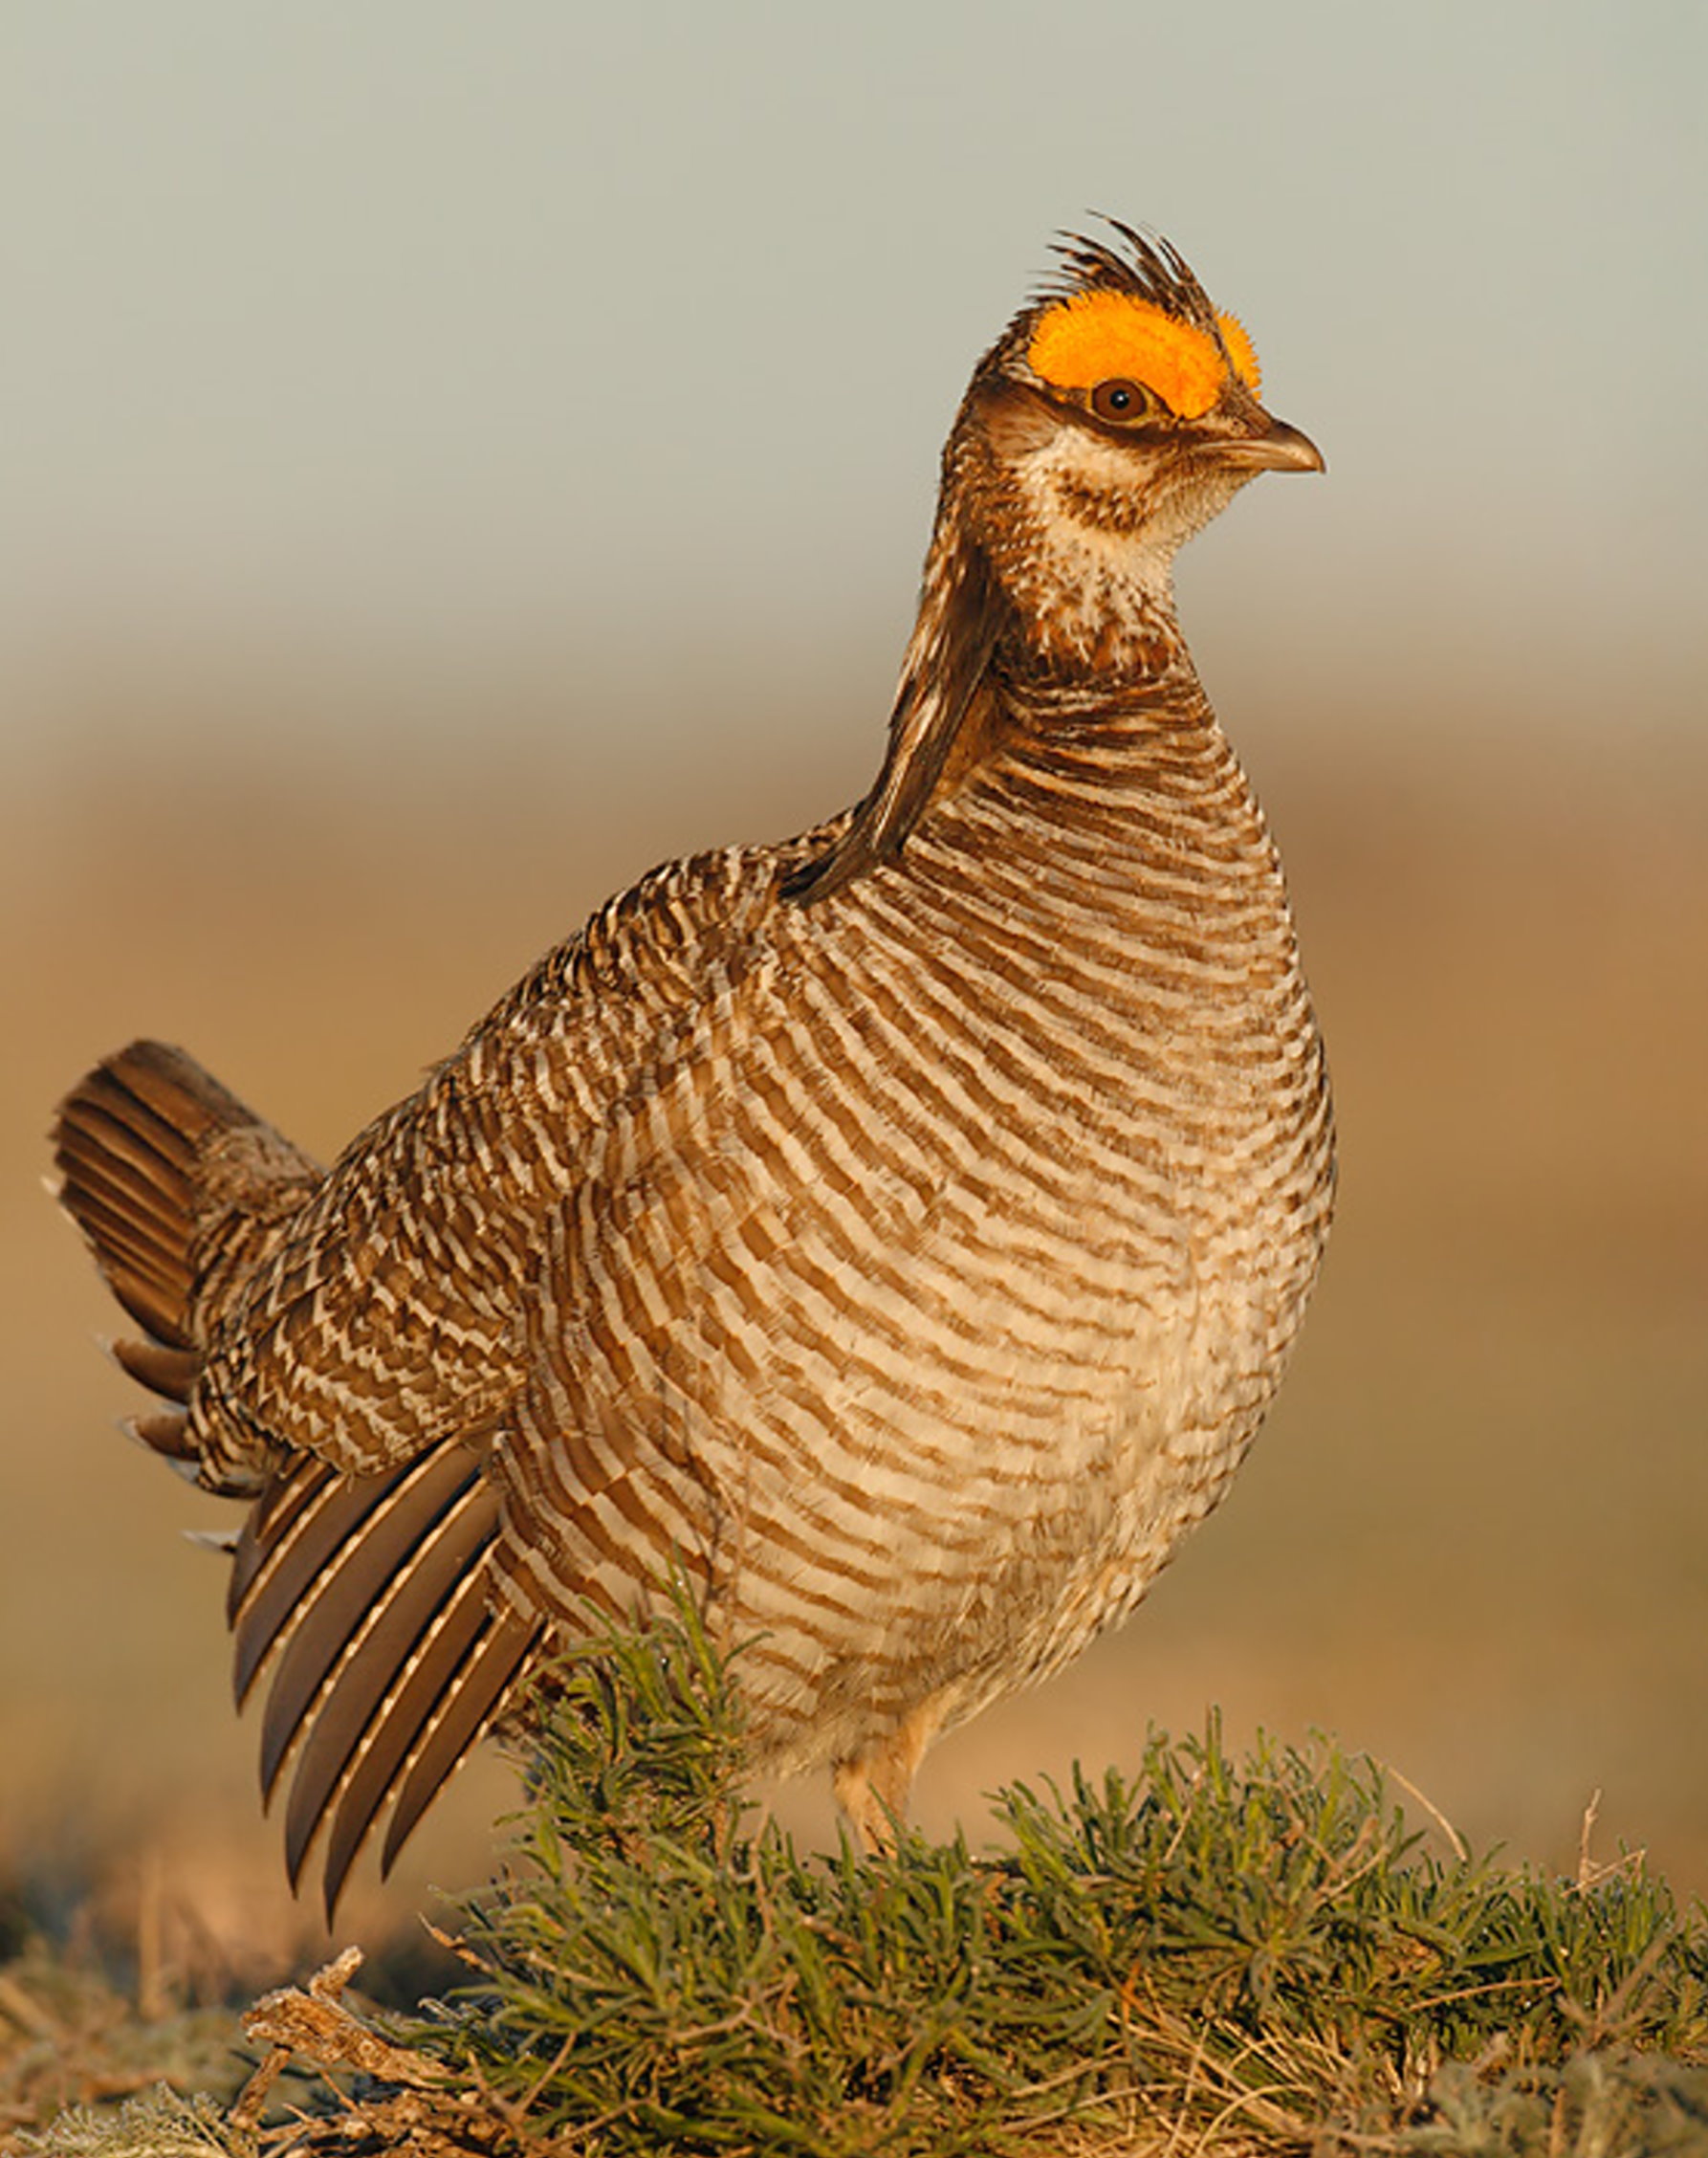 Forums to be Held on the Listing of Lesser Prairie Chicken on Endangered Species List